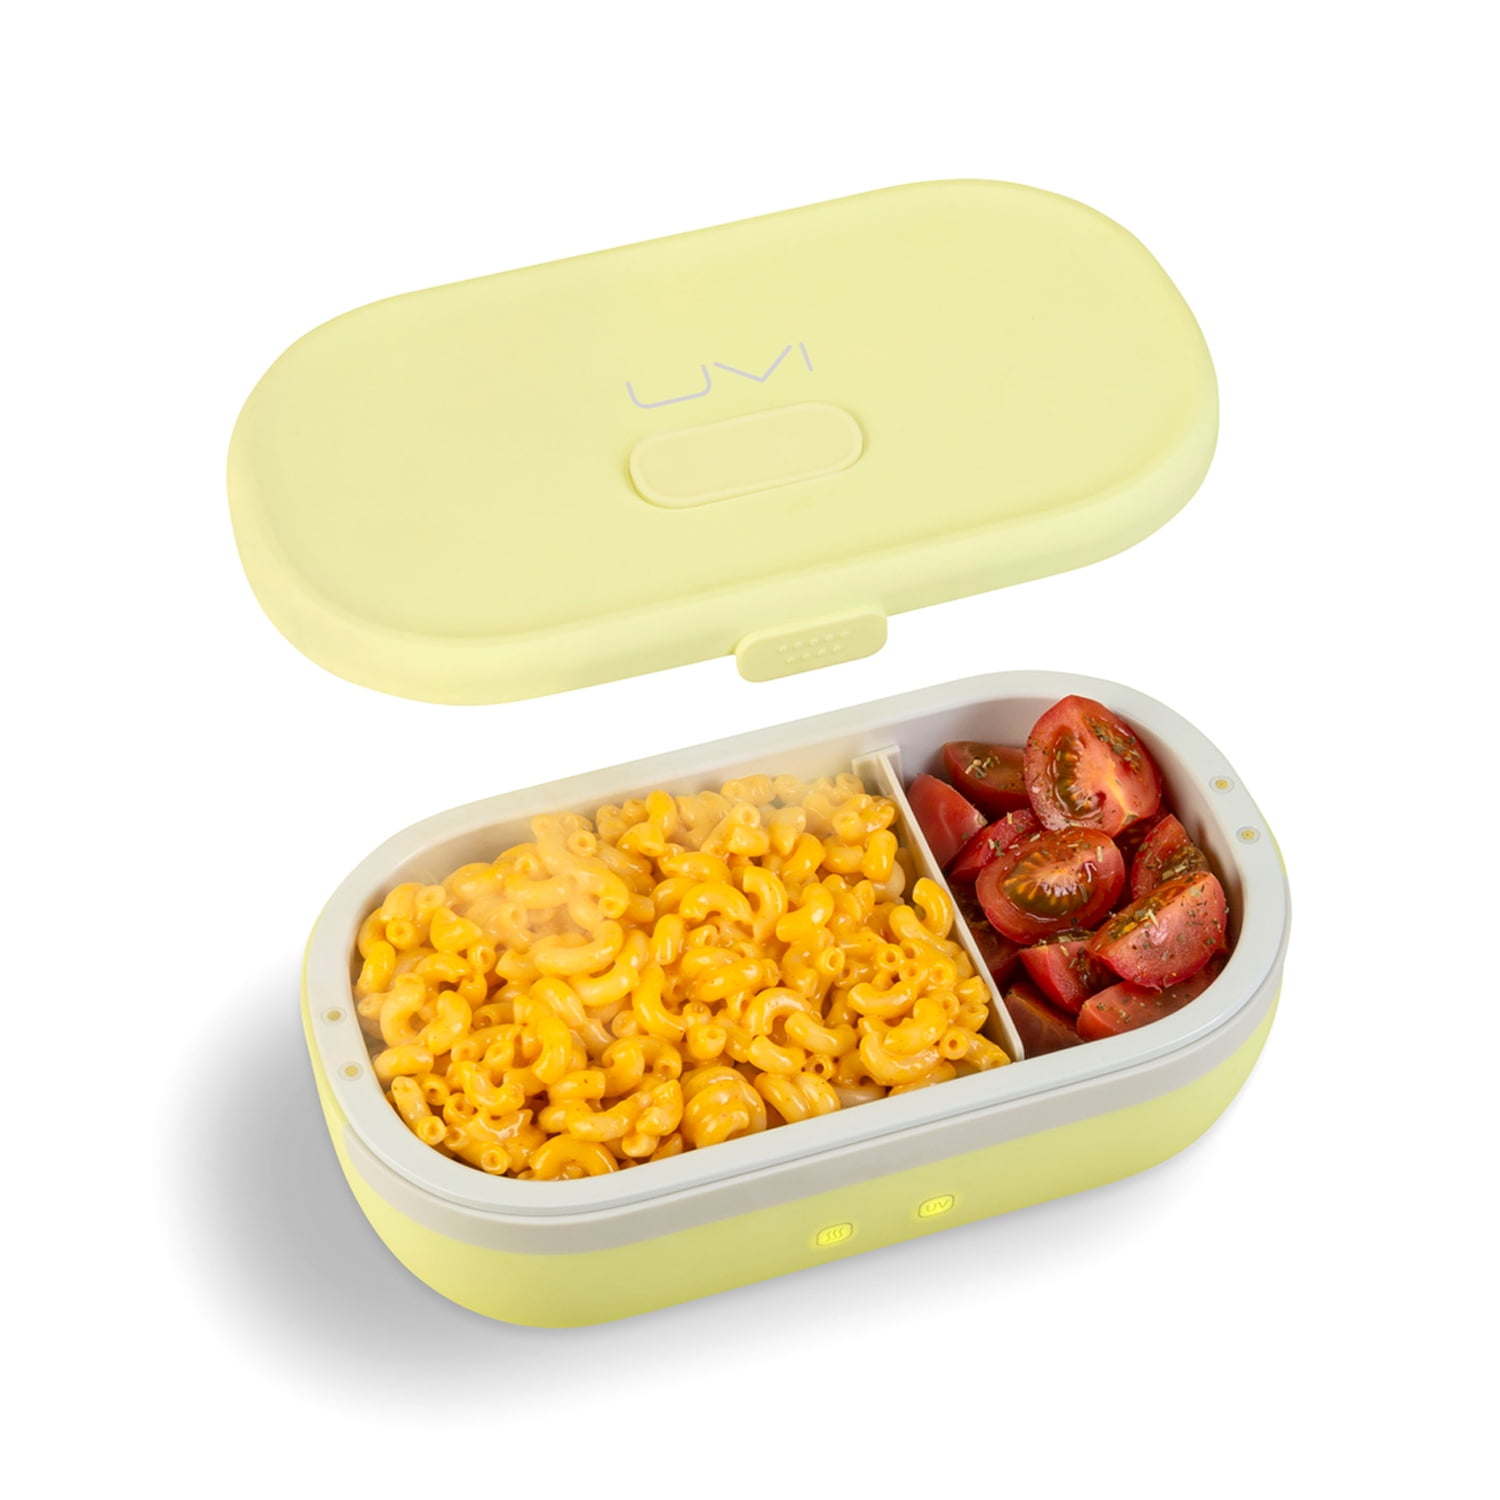 wileqep Folding Silicone Lunch Box Microwave Baking And Heating Tool Square  Fresh Keeping Bowl Office Worker Portable Student Lunchbox 